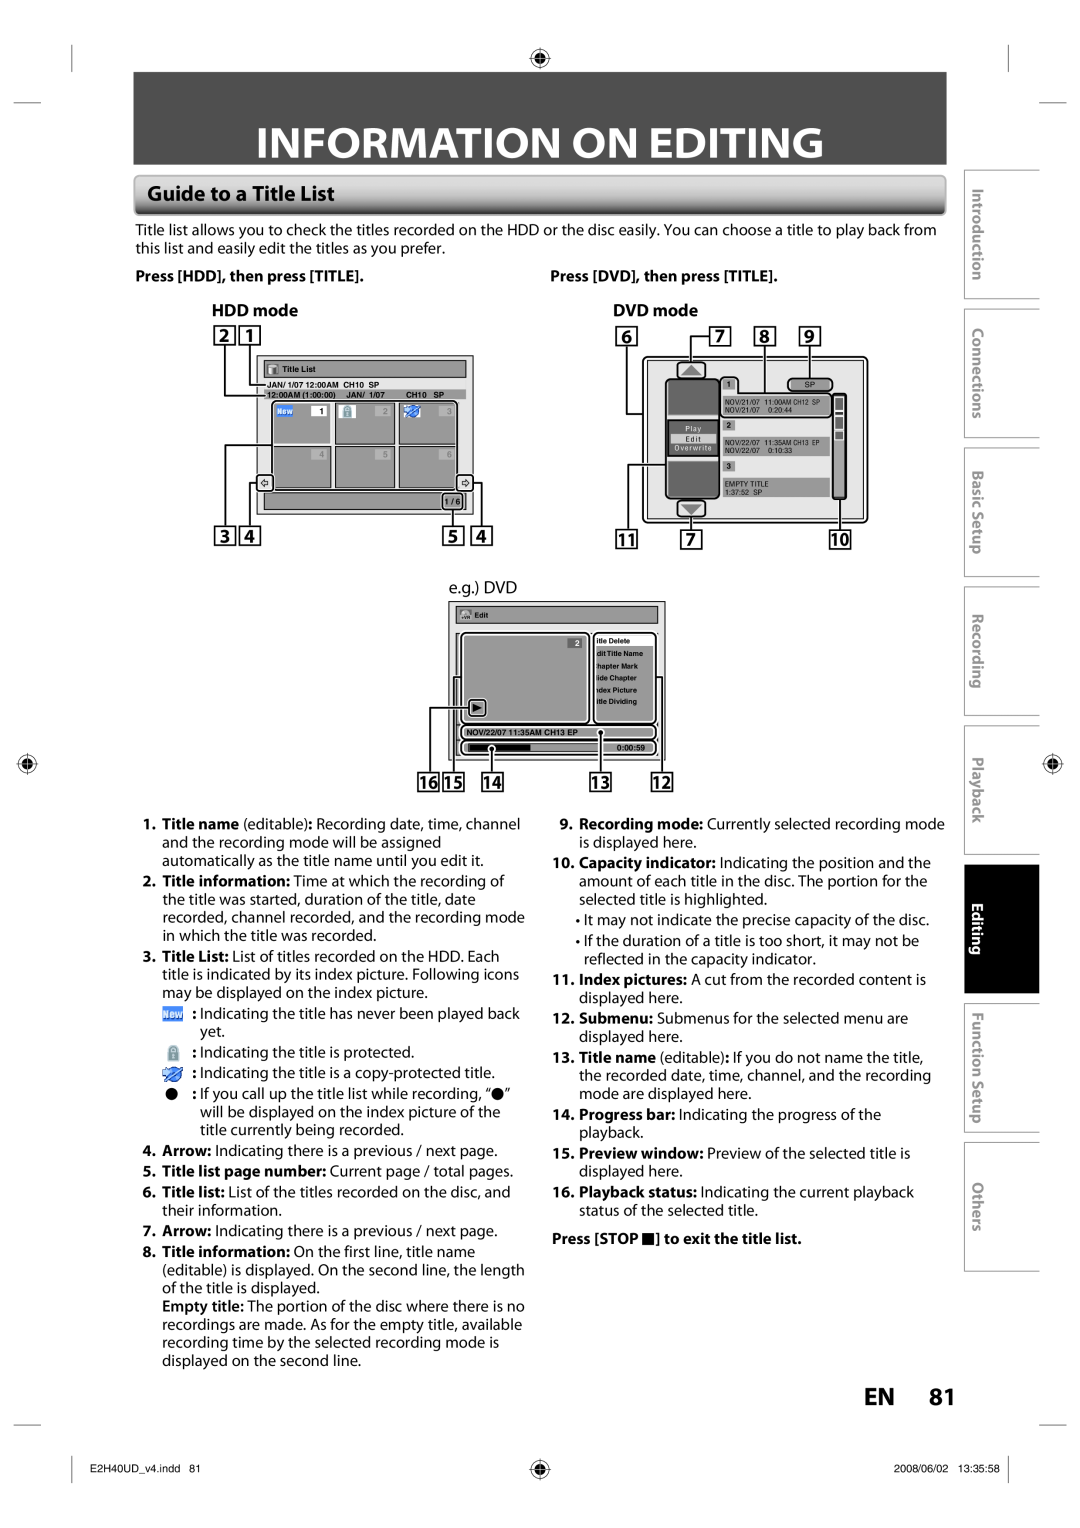 Philips DVDR3575H/37 manual Information On Editing, Guide to a Title List, HDD mode, DVD mode, Press HDD, then press TITLE 